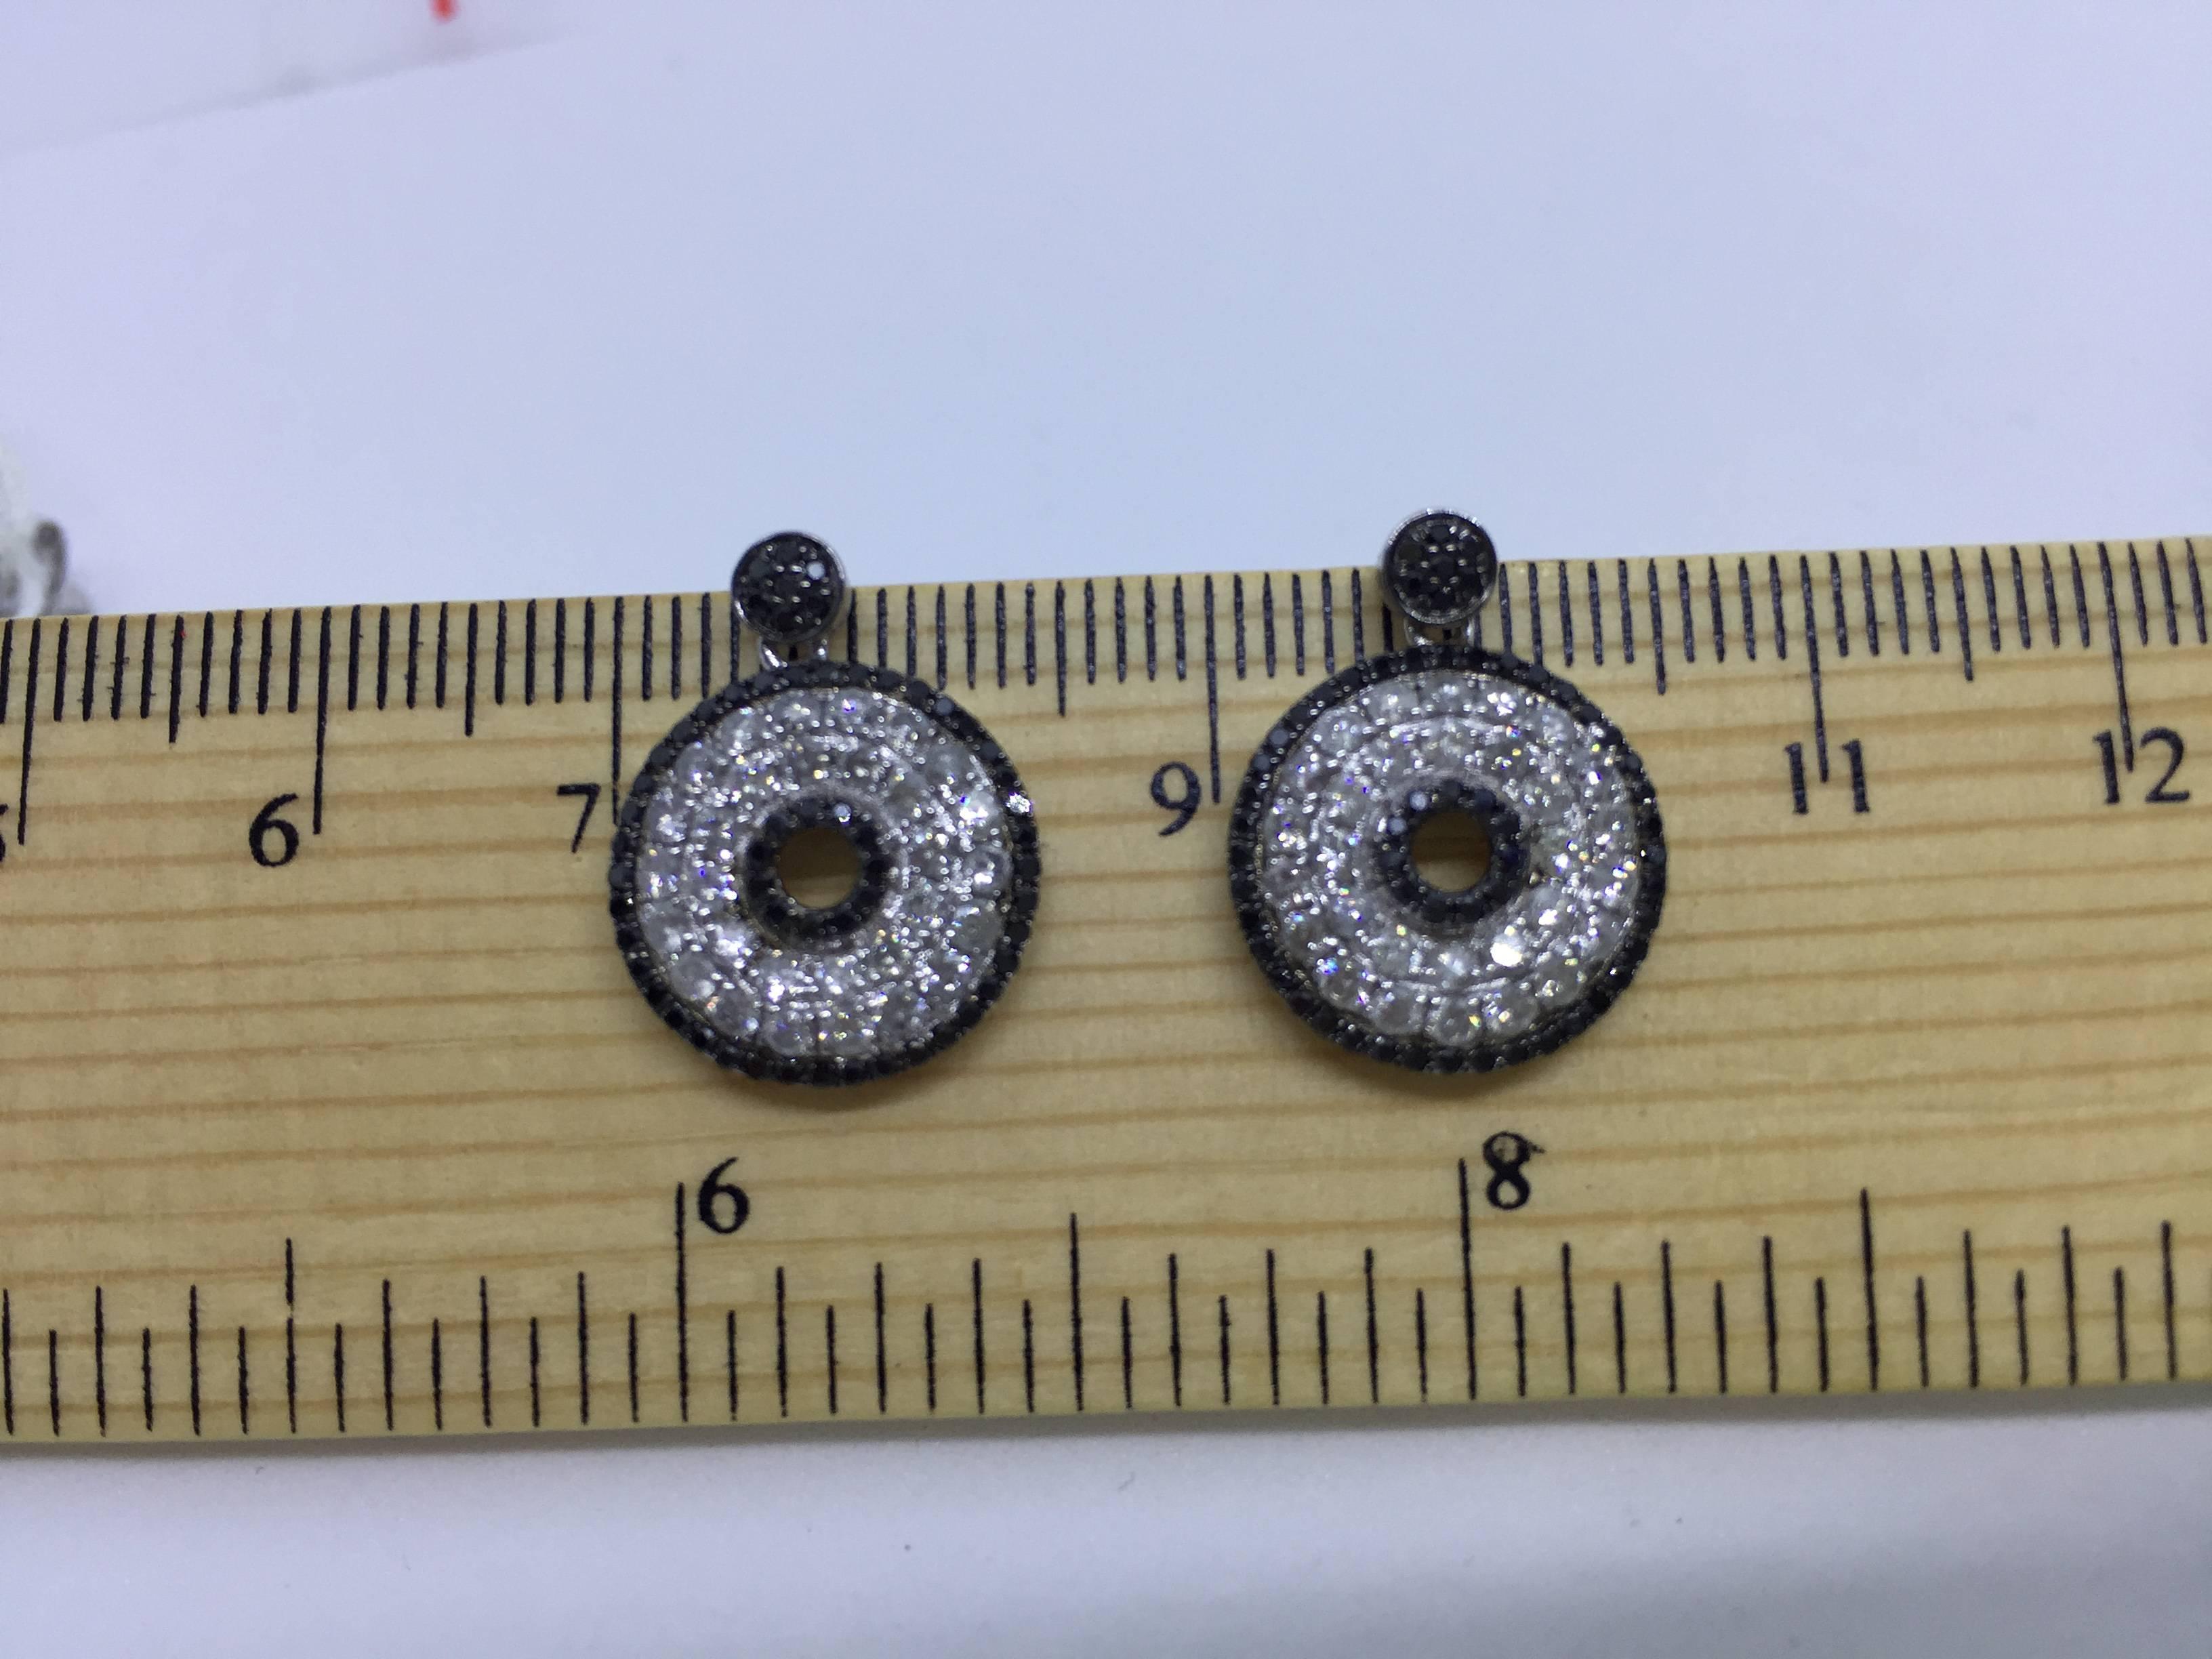 A PAIR OF BLACK AND WHITE DIAMOND EARRINGS by Emily Sam Collection

116 Black Round Diamonds totalling 0.44 Carat
60 Round Brilliant Diamonds totalling 1.20 Carat
18 Carat White Gold
Size 15mm or 1.5cm with the overall drop being 18mm 
by Emily Sam